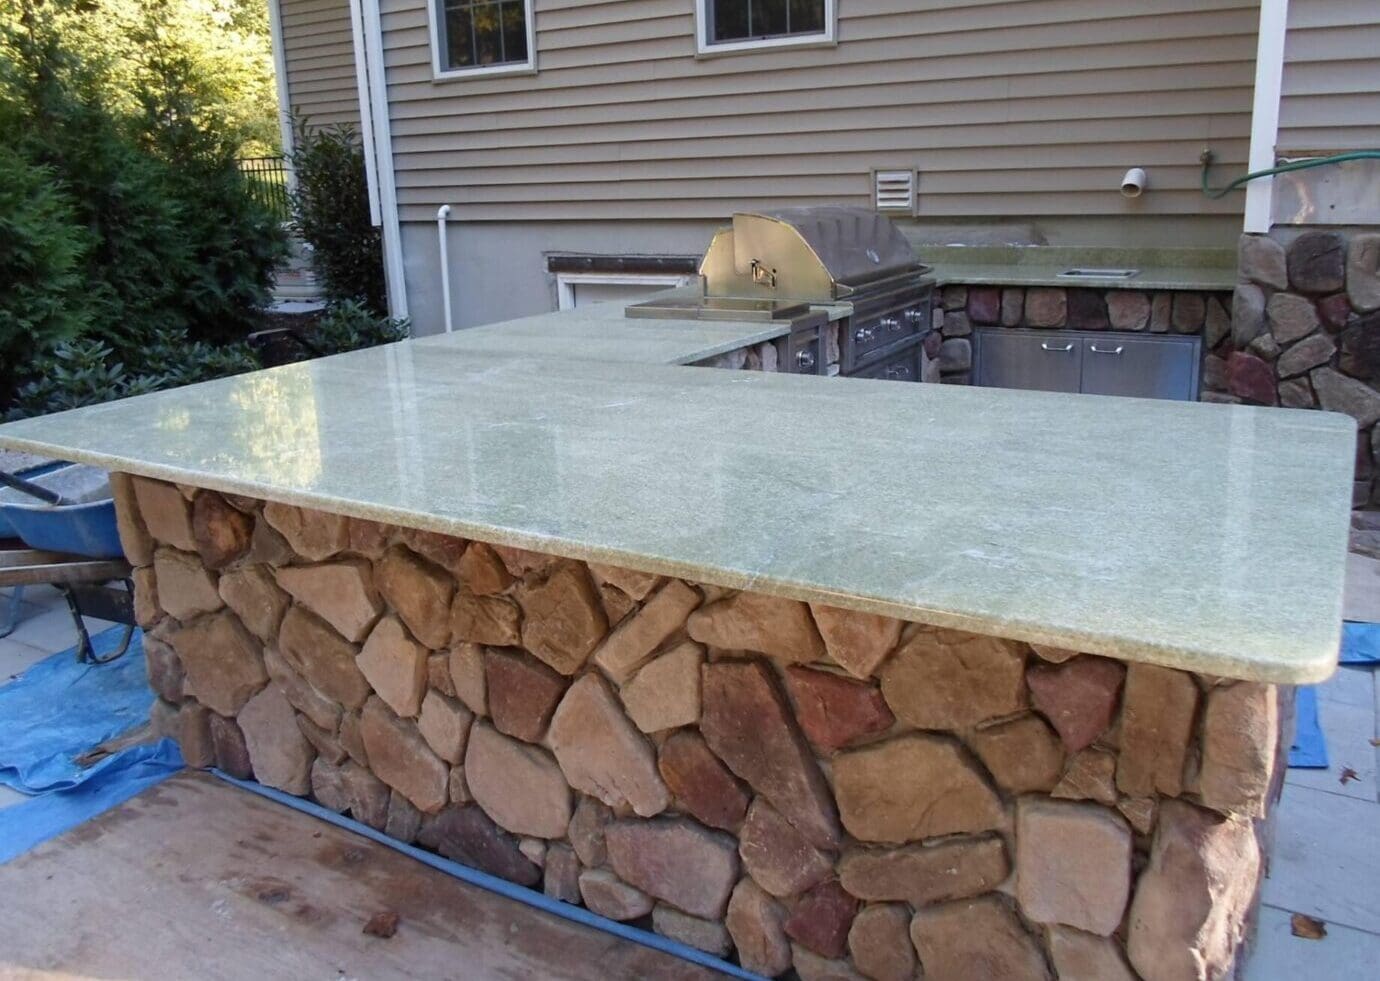 A stone wall with a glass top counter.